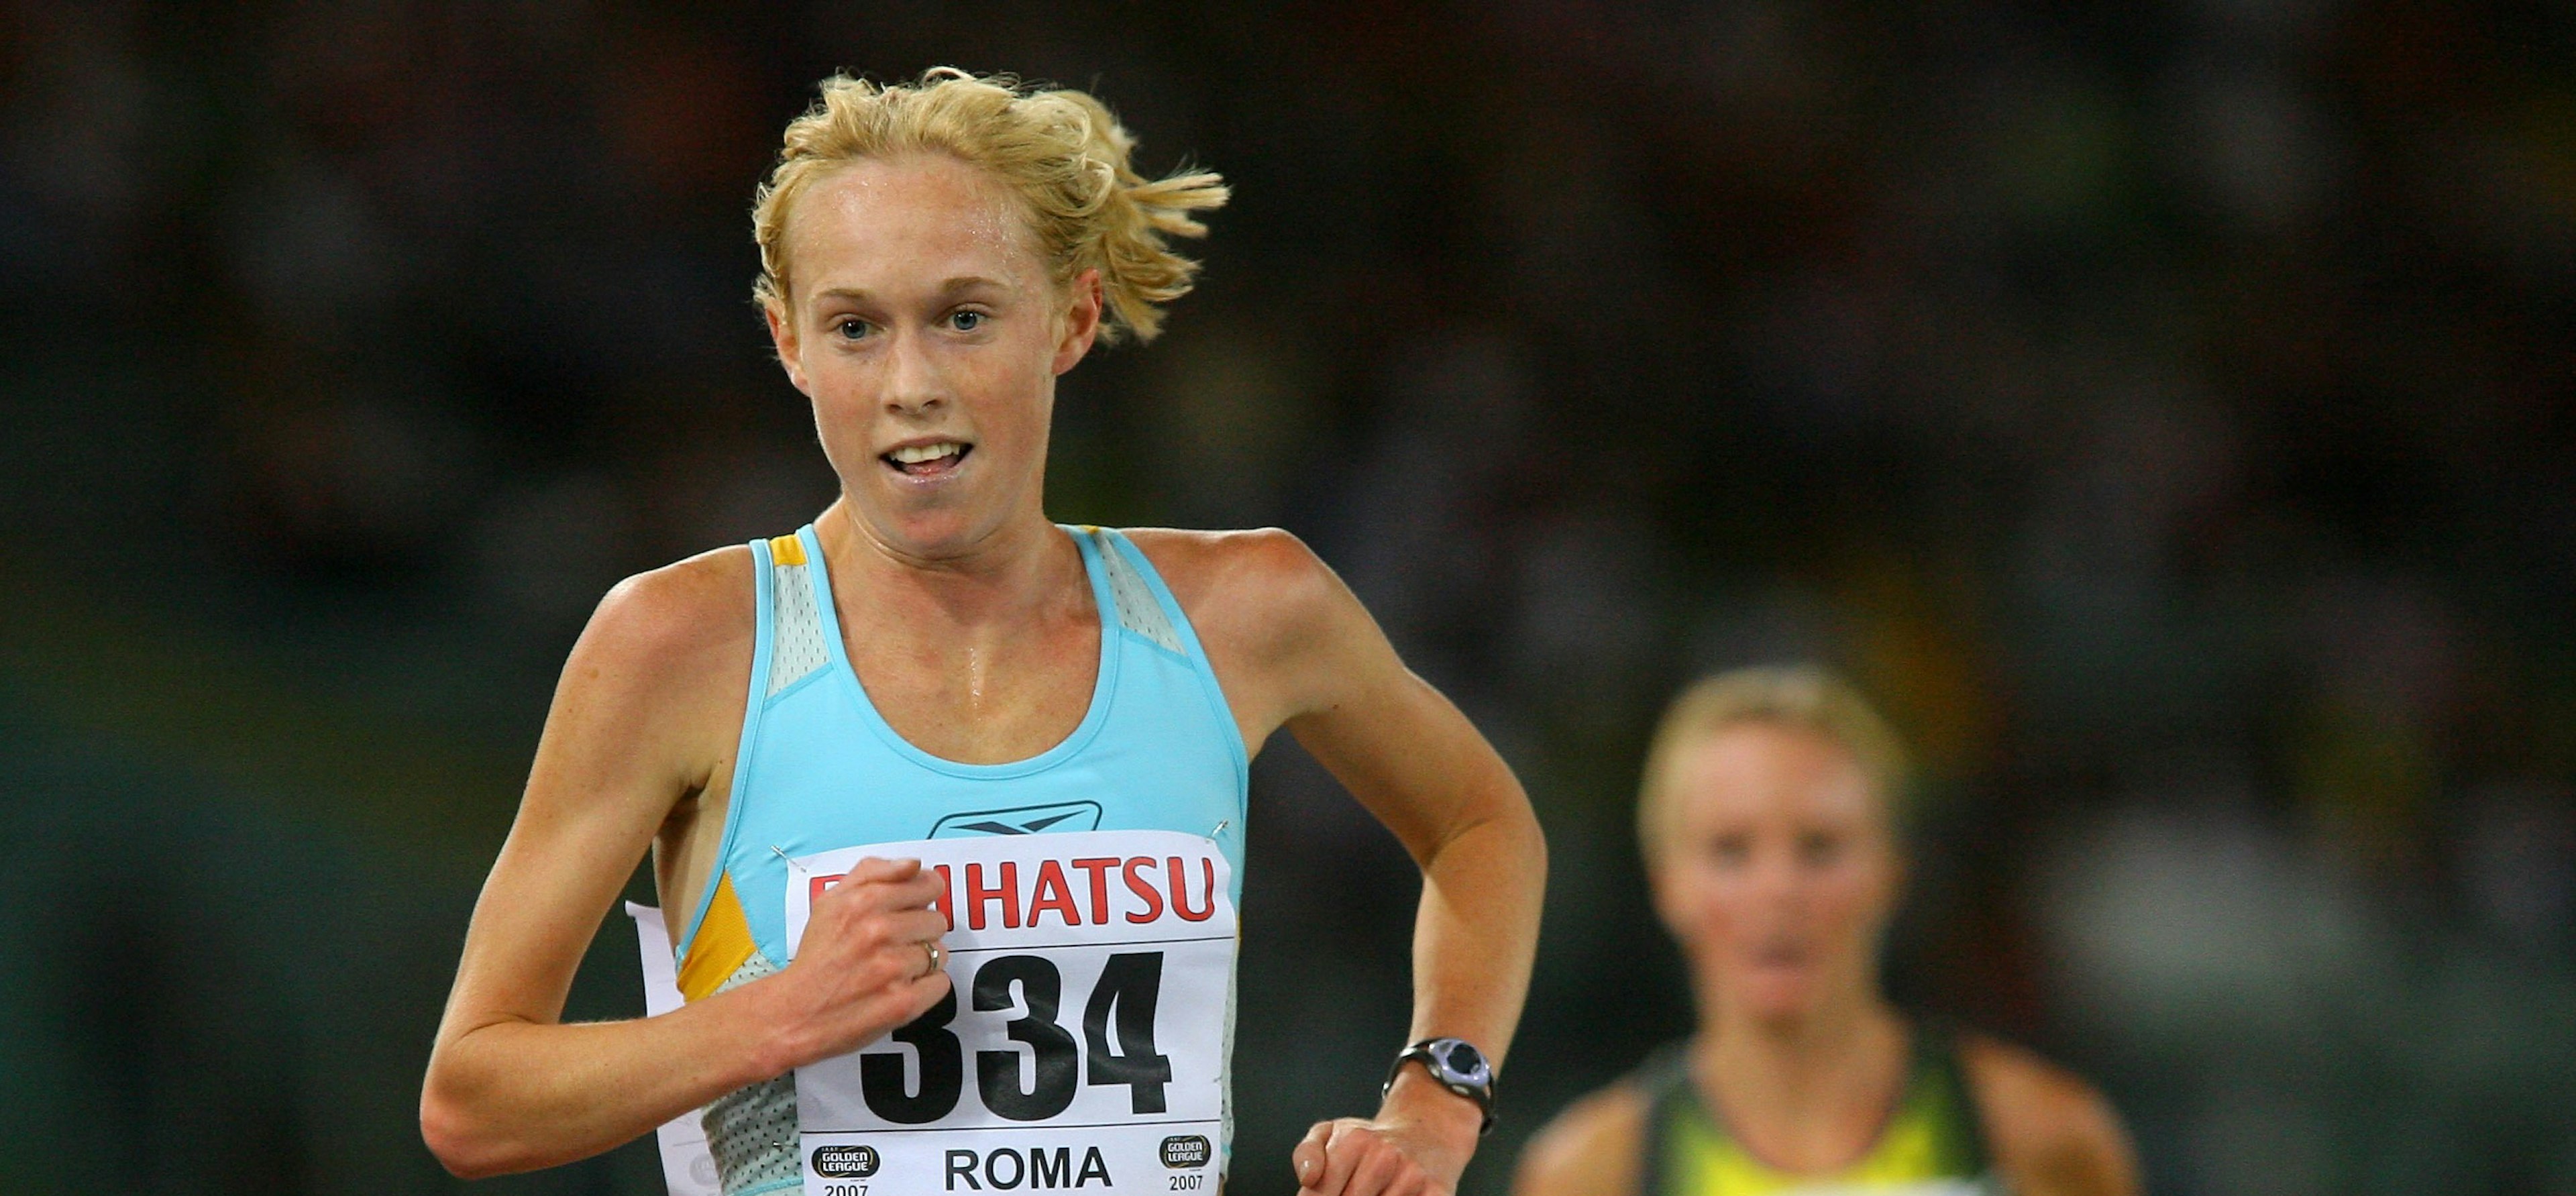 Kim Smith out of Glasgow 2014 Commonwealth Games